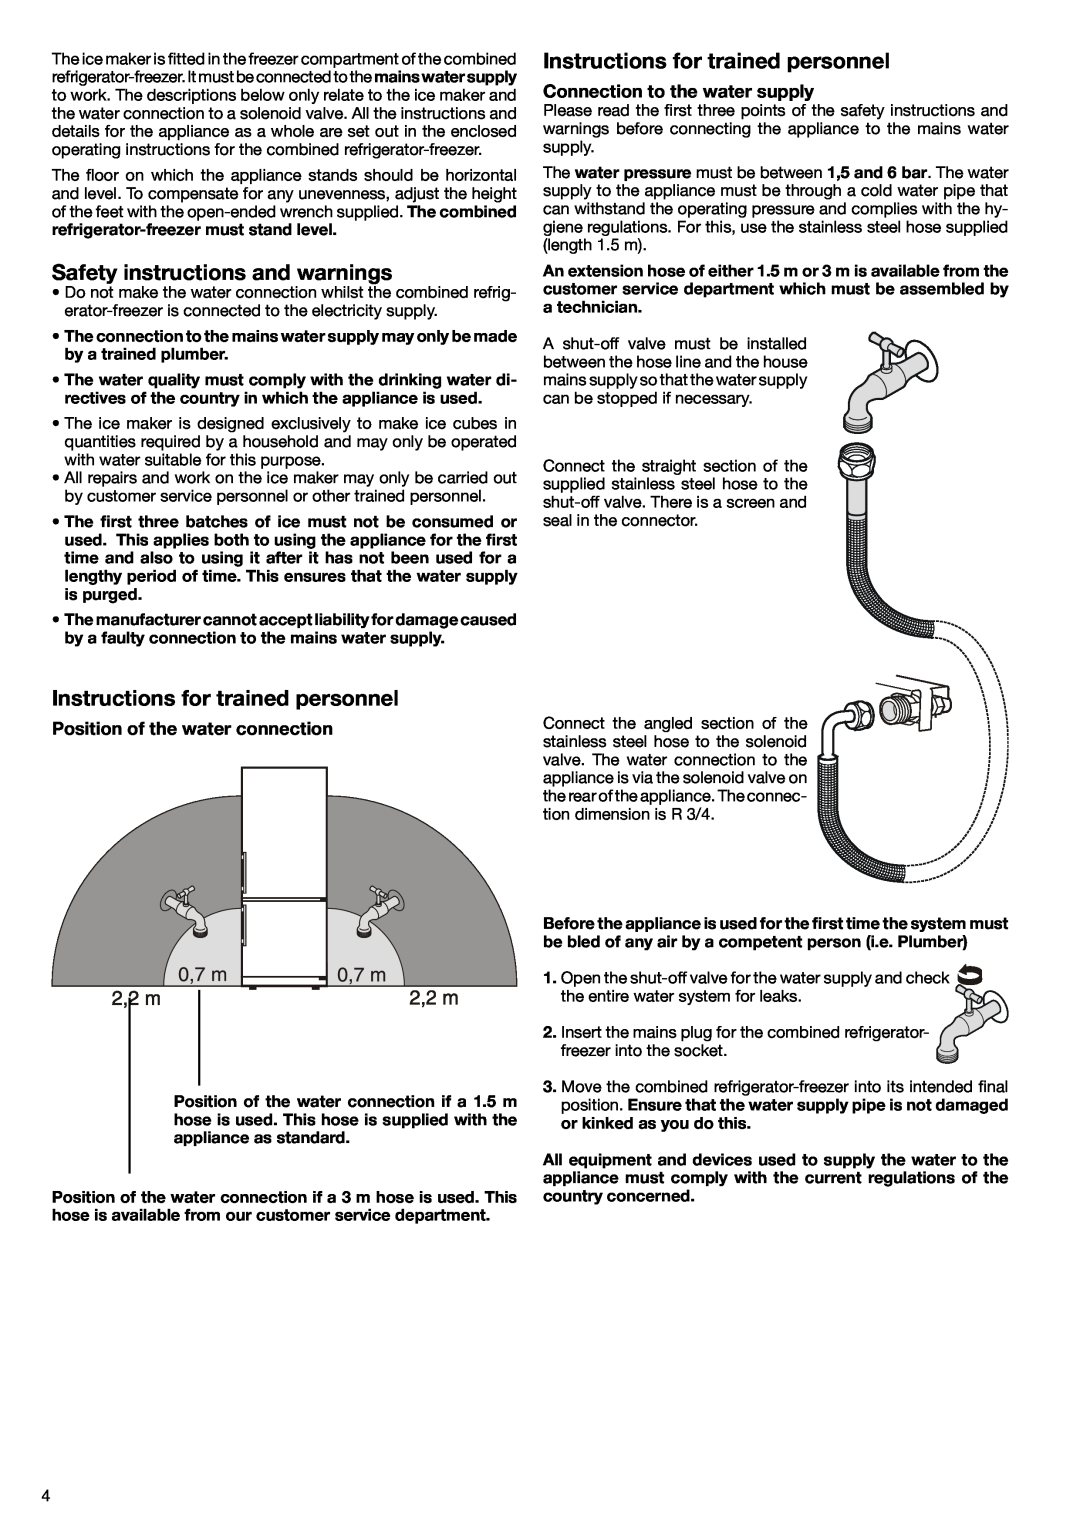 Liebherr 7082 532-00 Safety instructions and warnings, Instructions for trained personnel, Connection to the water supply 